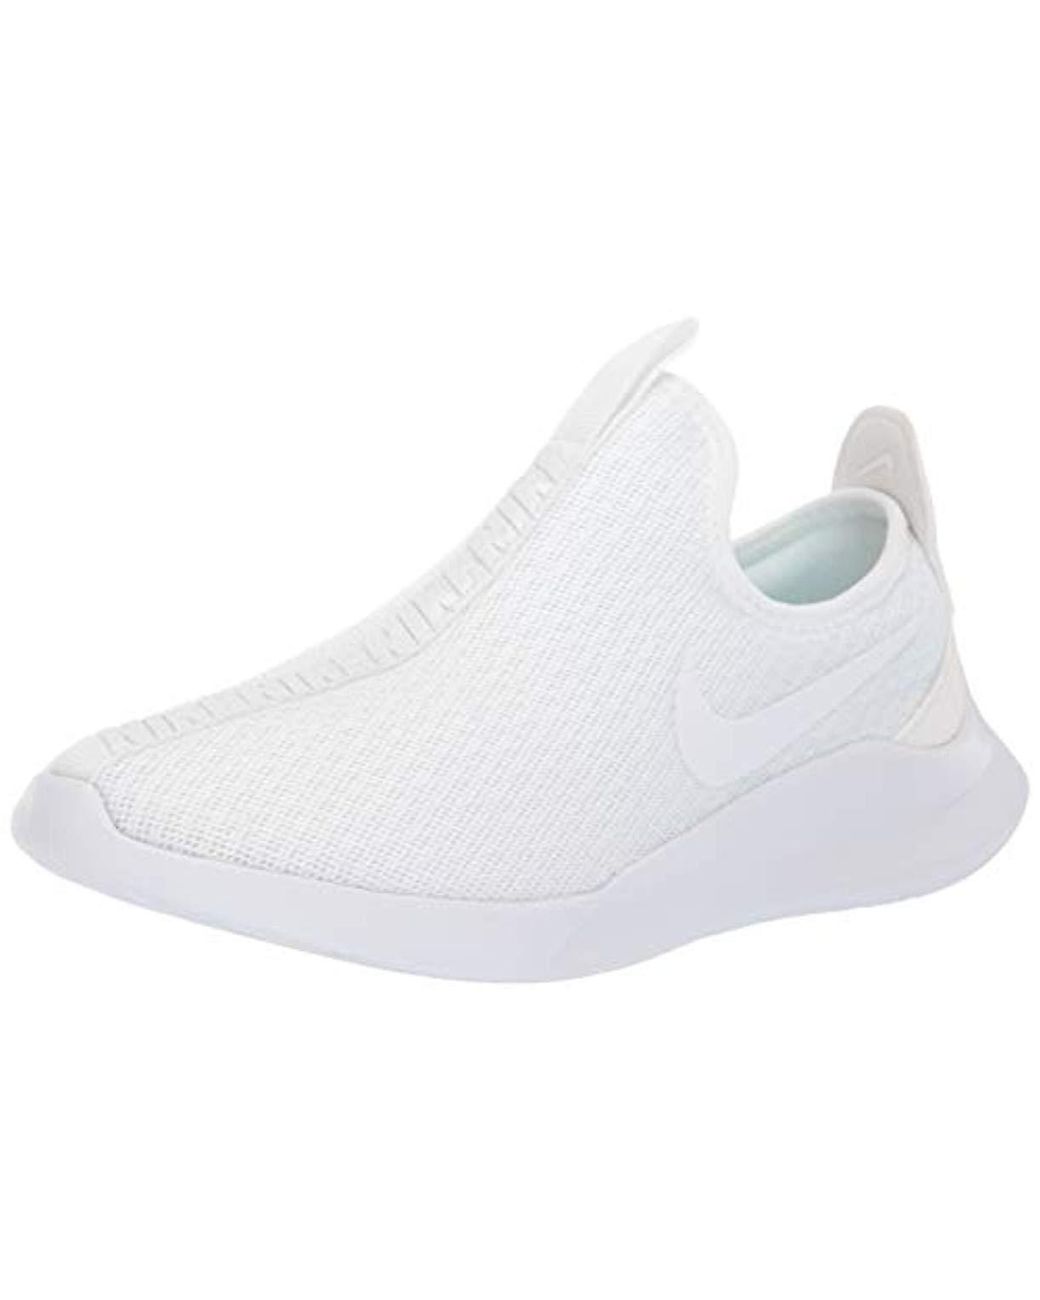 Nike Wmns Viale Slp Track & Field Shoes in White | Lyst